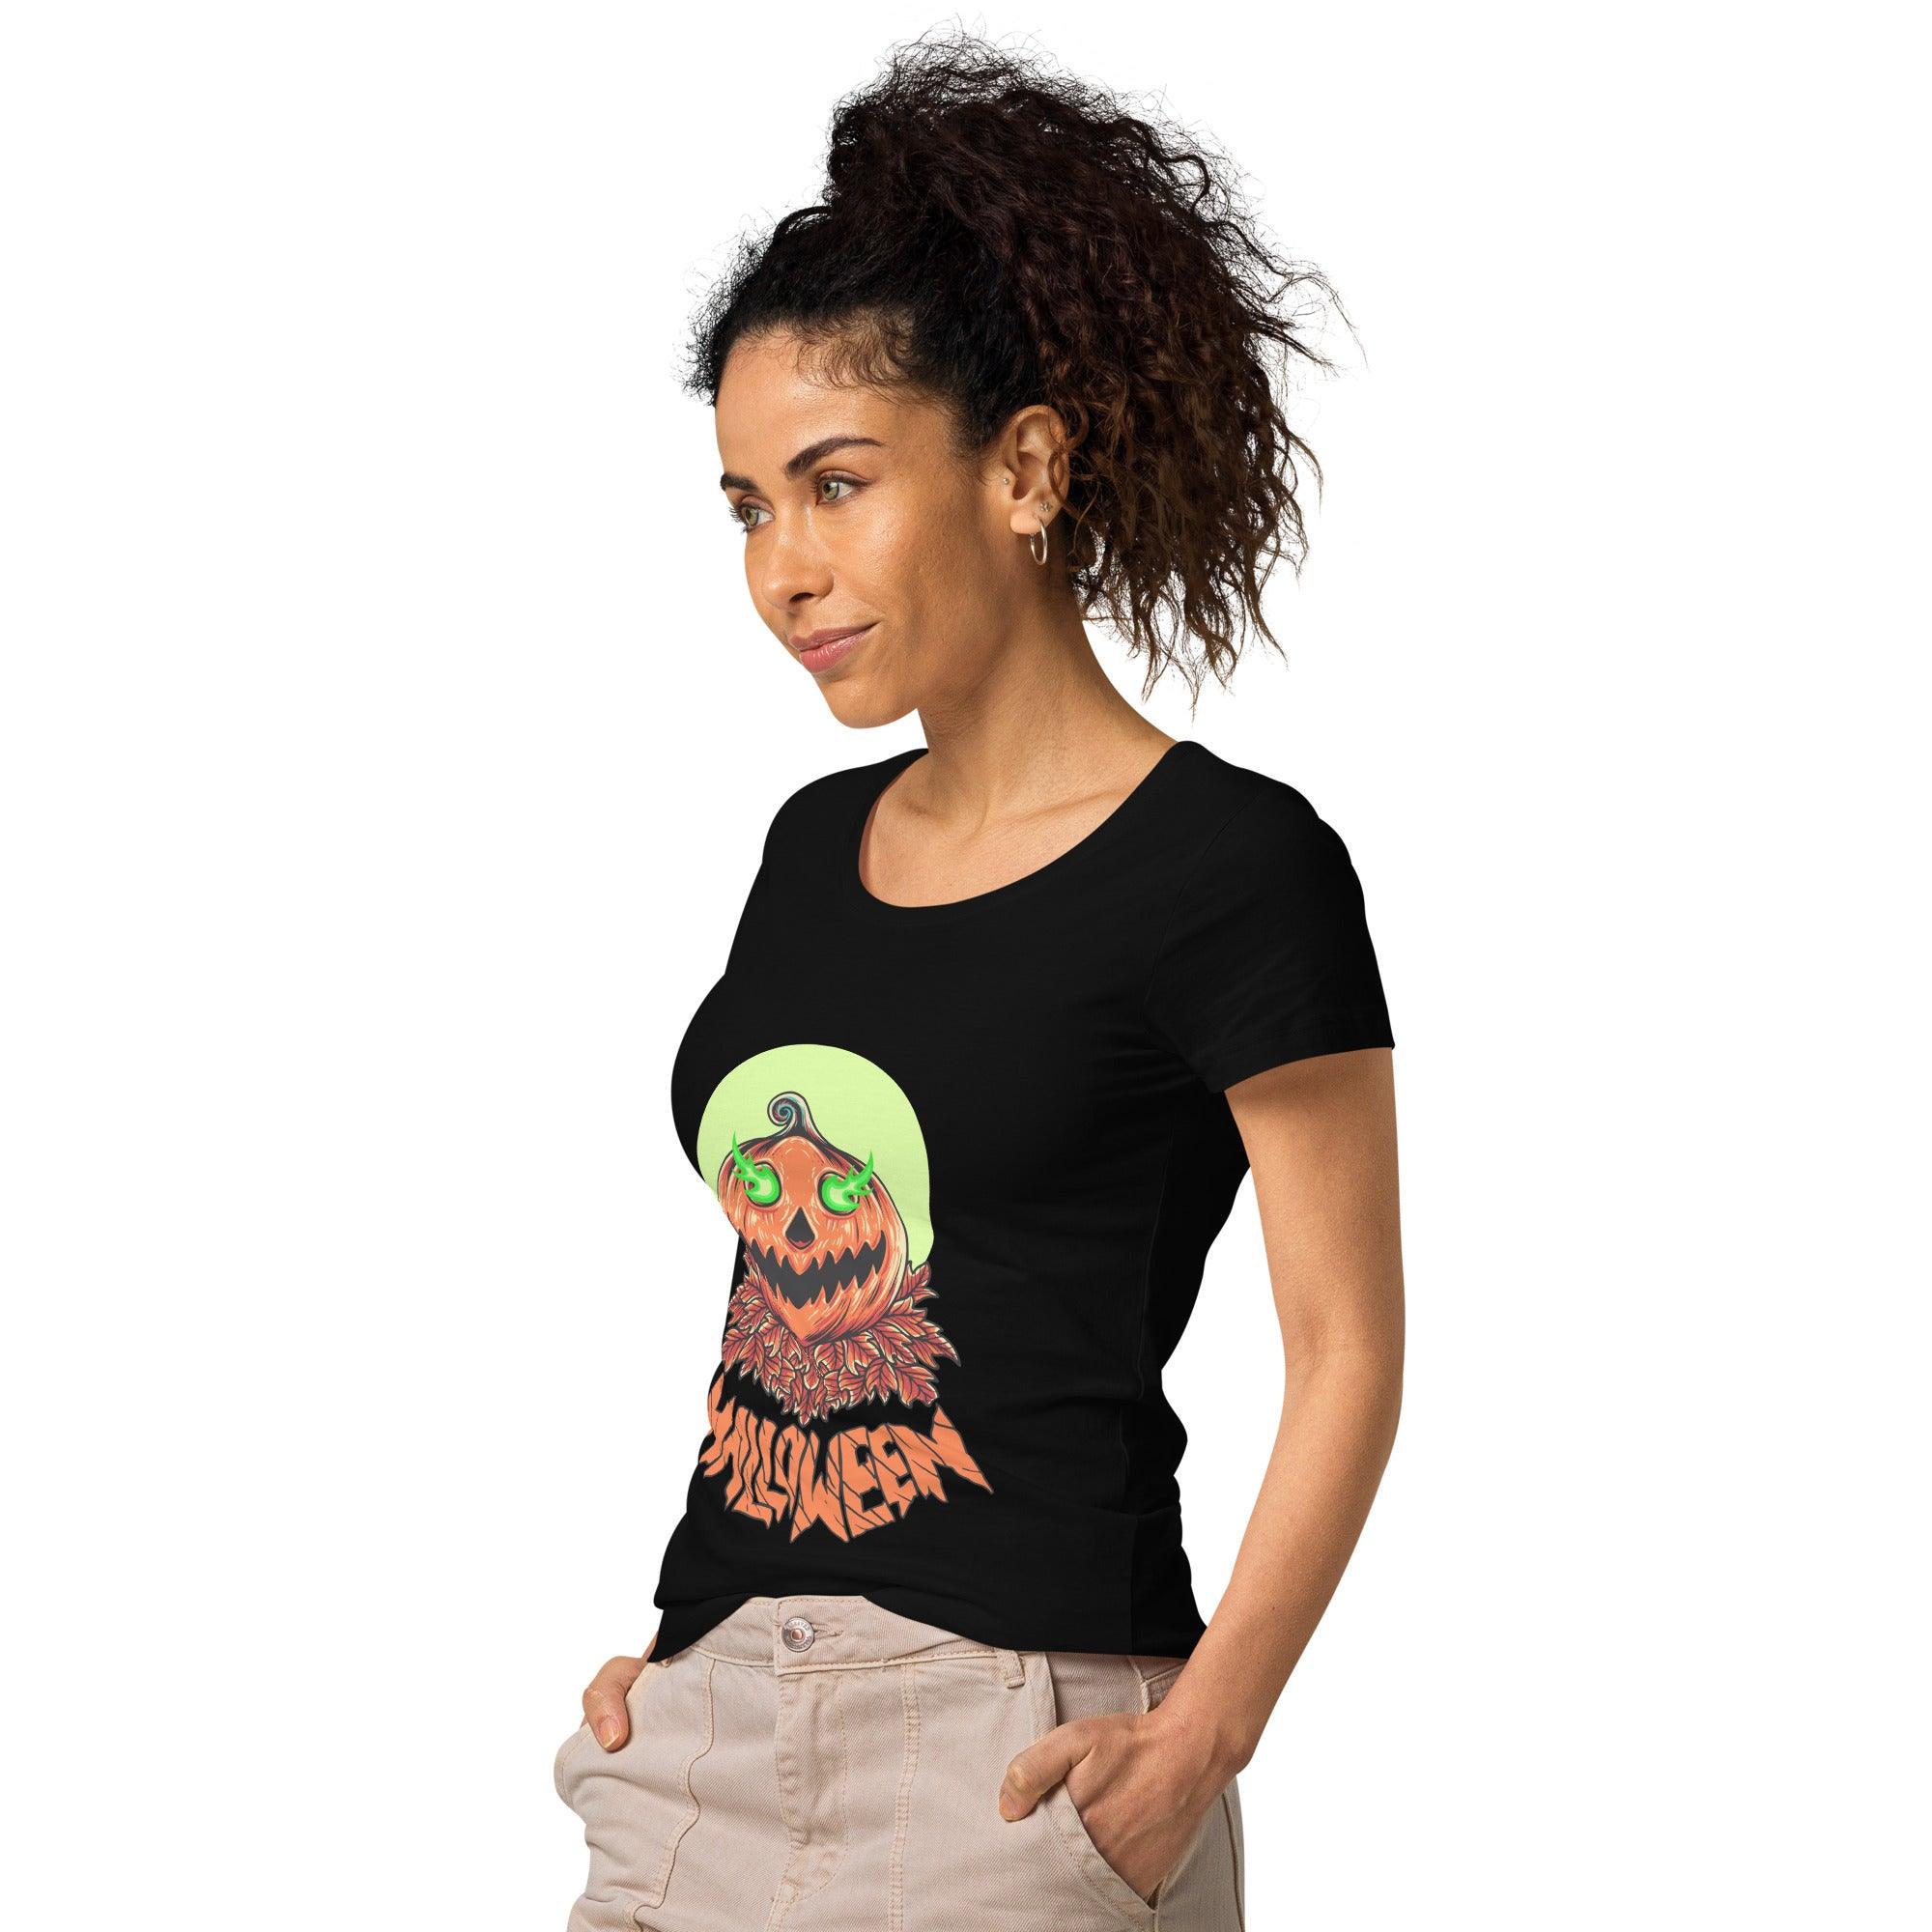 Organic Women's Halloween Tee featuring moon phases, perfect for magical seasonal style.